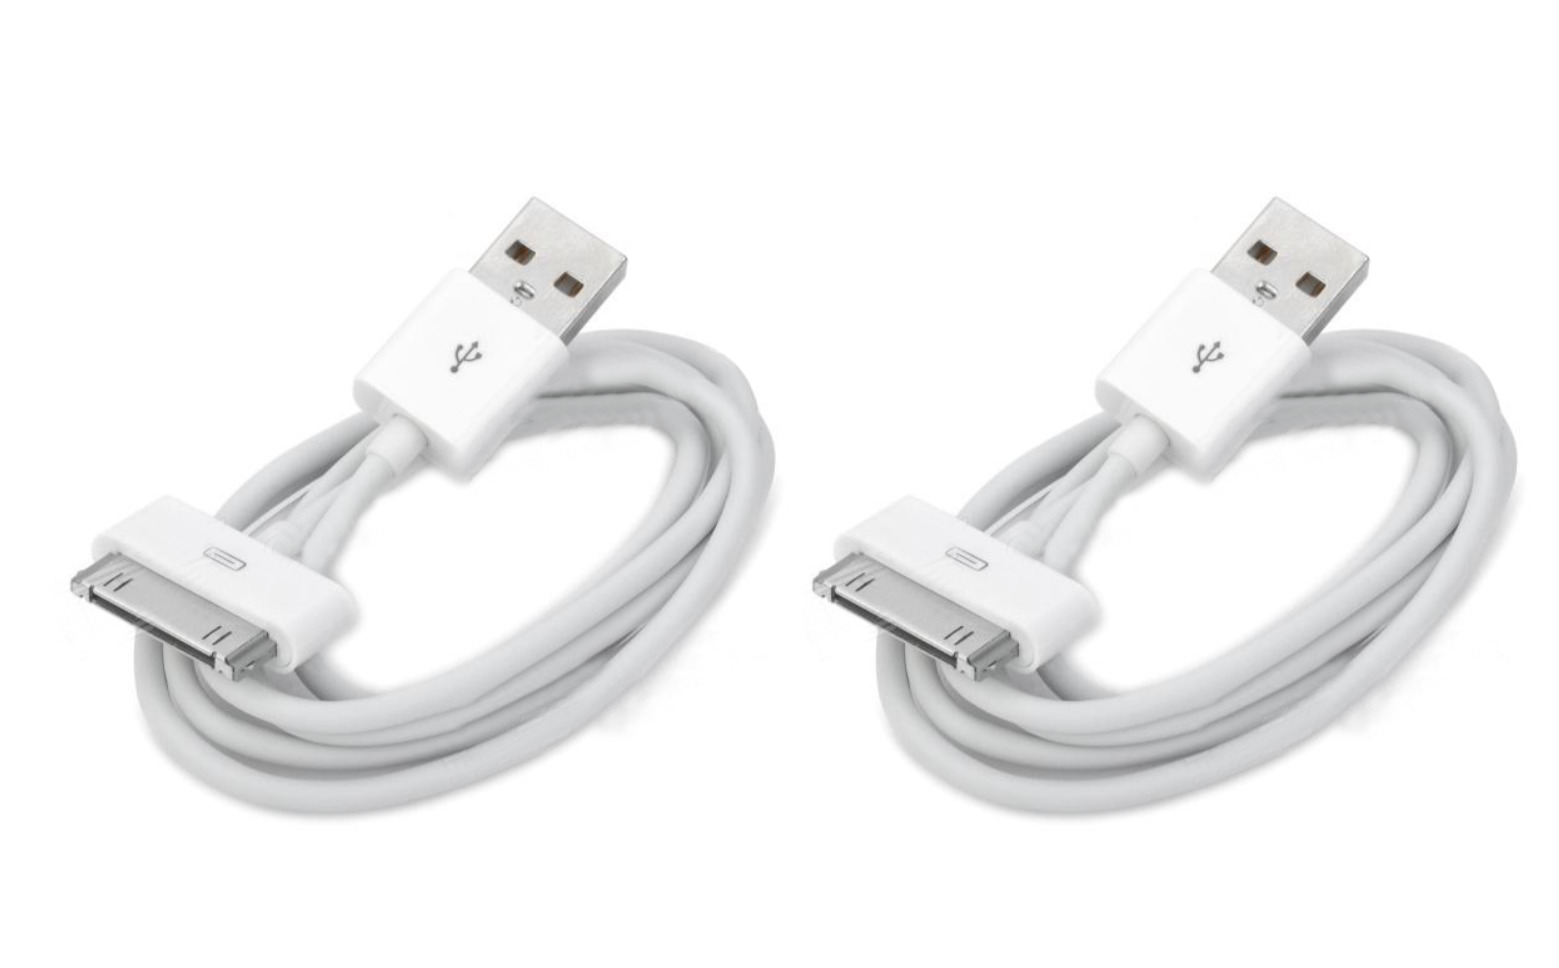 2 Pc 6FT USB Charger Data Sync Cable Cord For iPhone 3G/4/4S iPad 2 iPod nano1-6